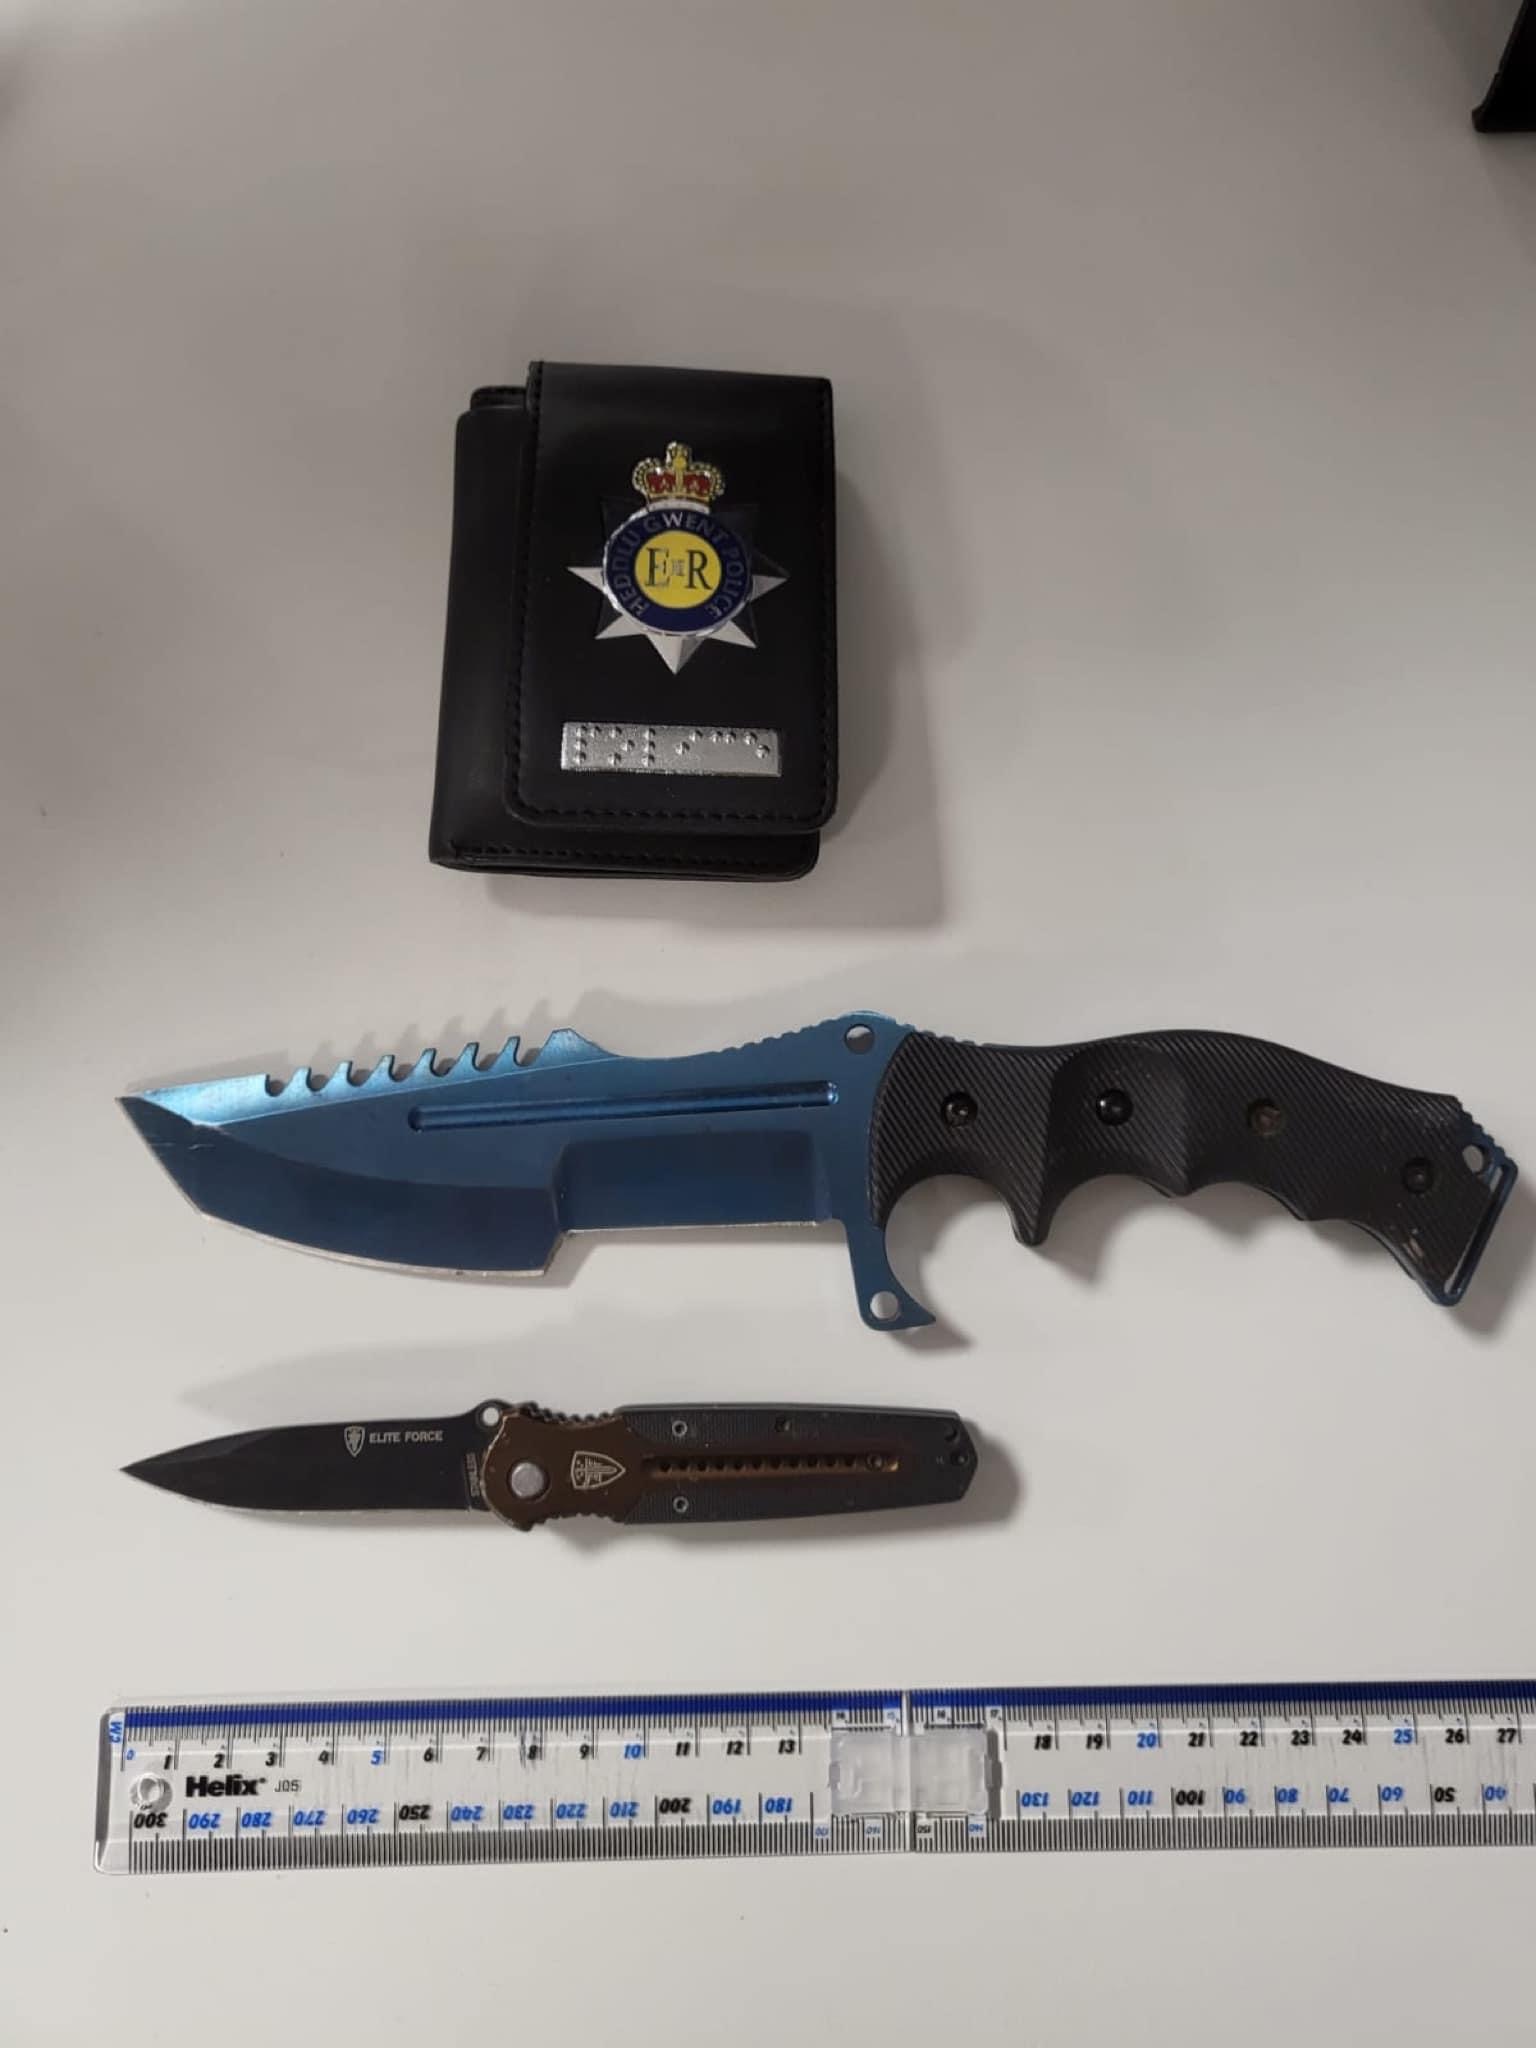 NEWS | Police arrest man for driving with no licence and insurance and also drug driving and possession of knives